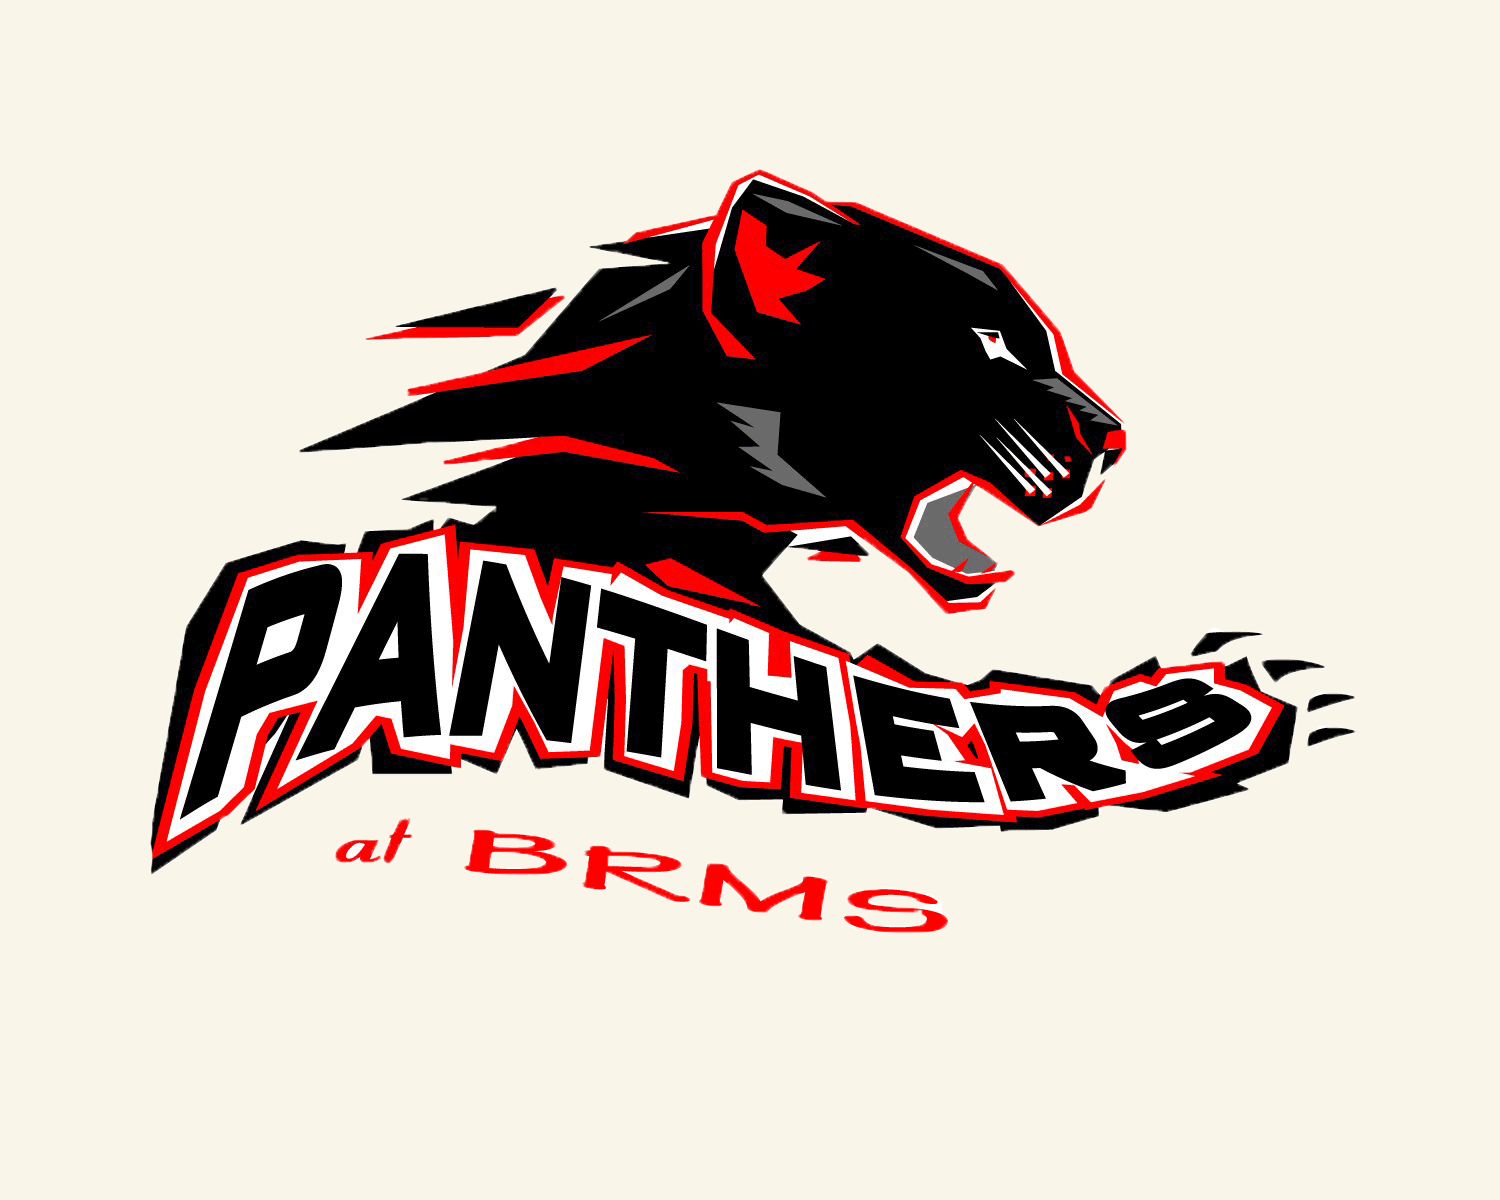 Red Panther Logo - panther logo HD Wallpapers Download Free for HD, High Quality ...